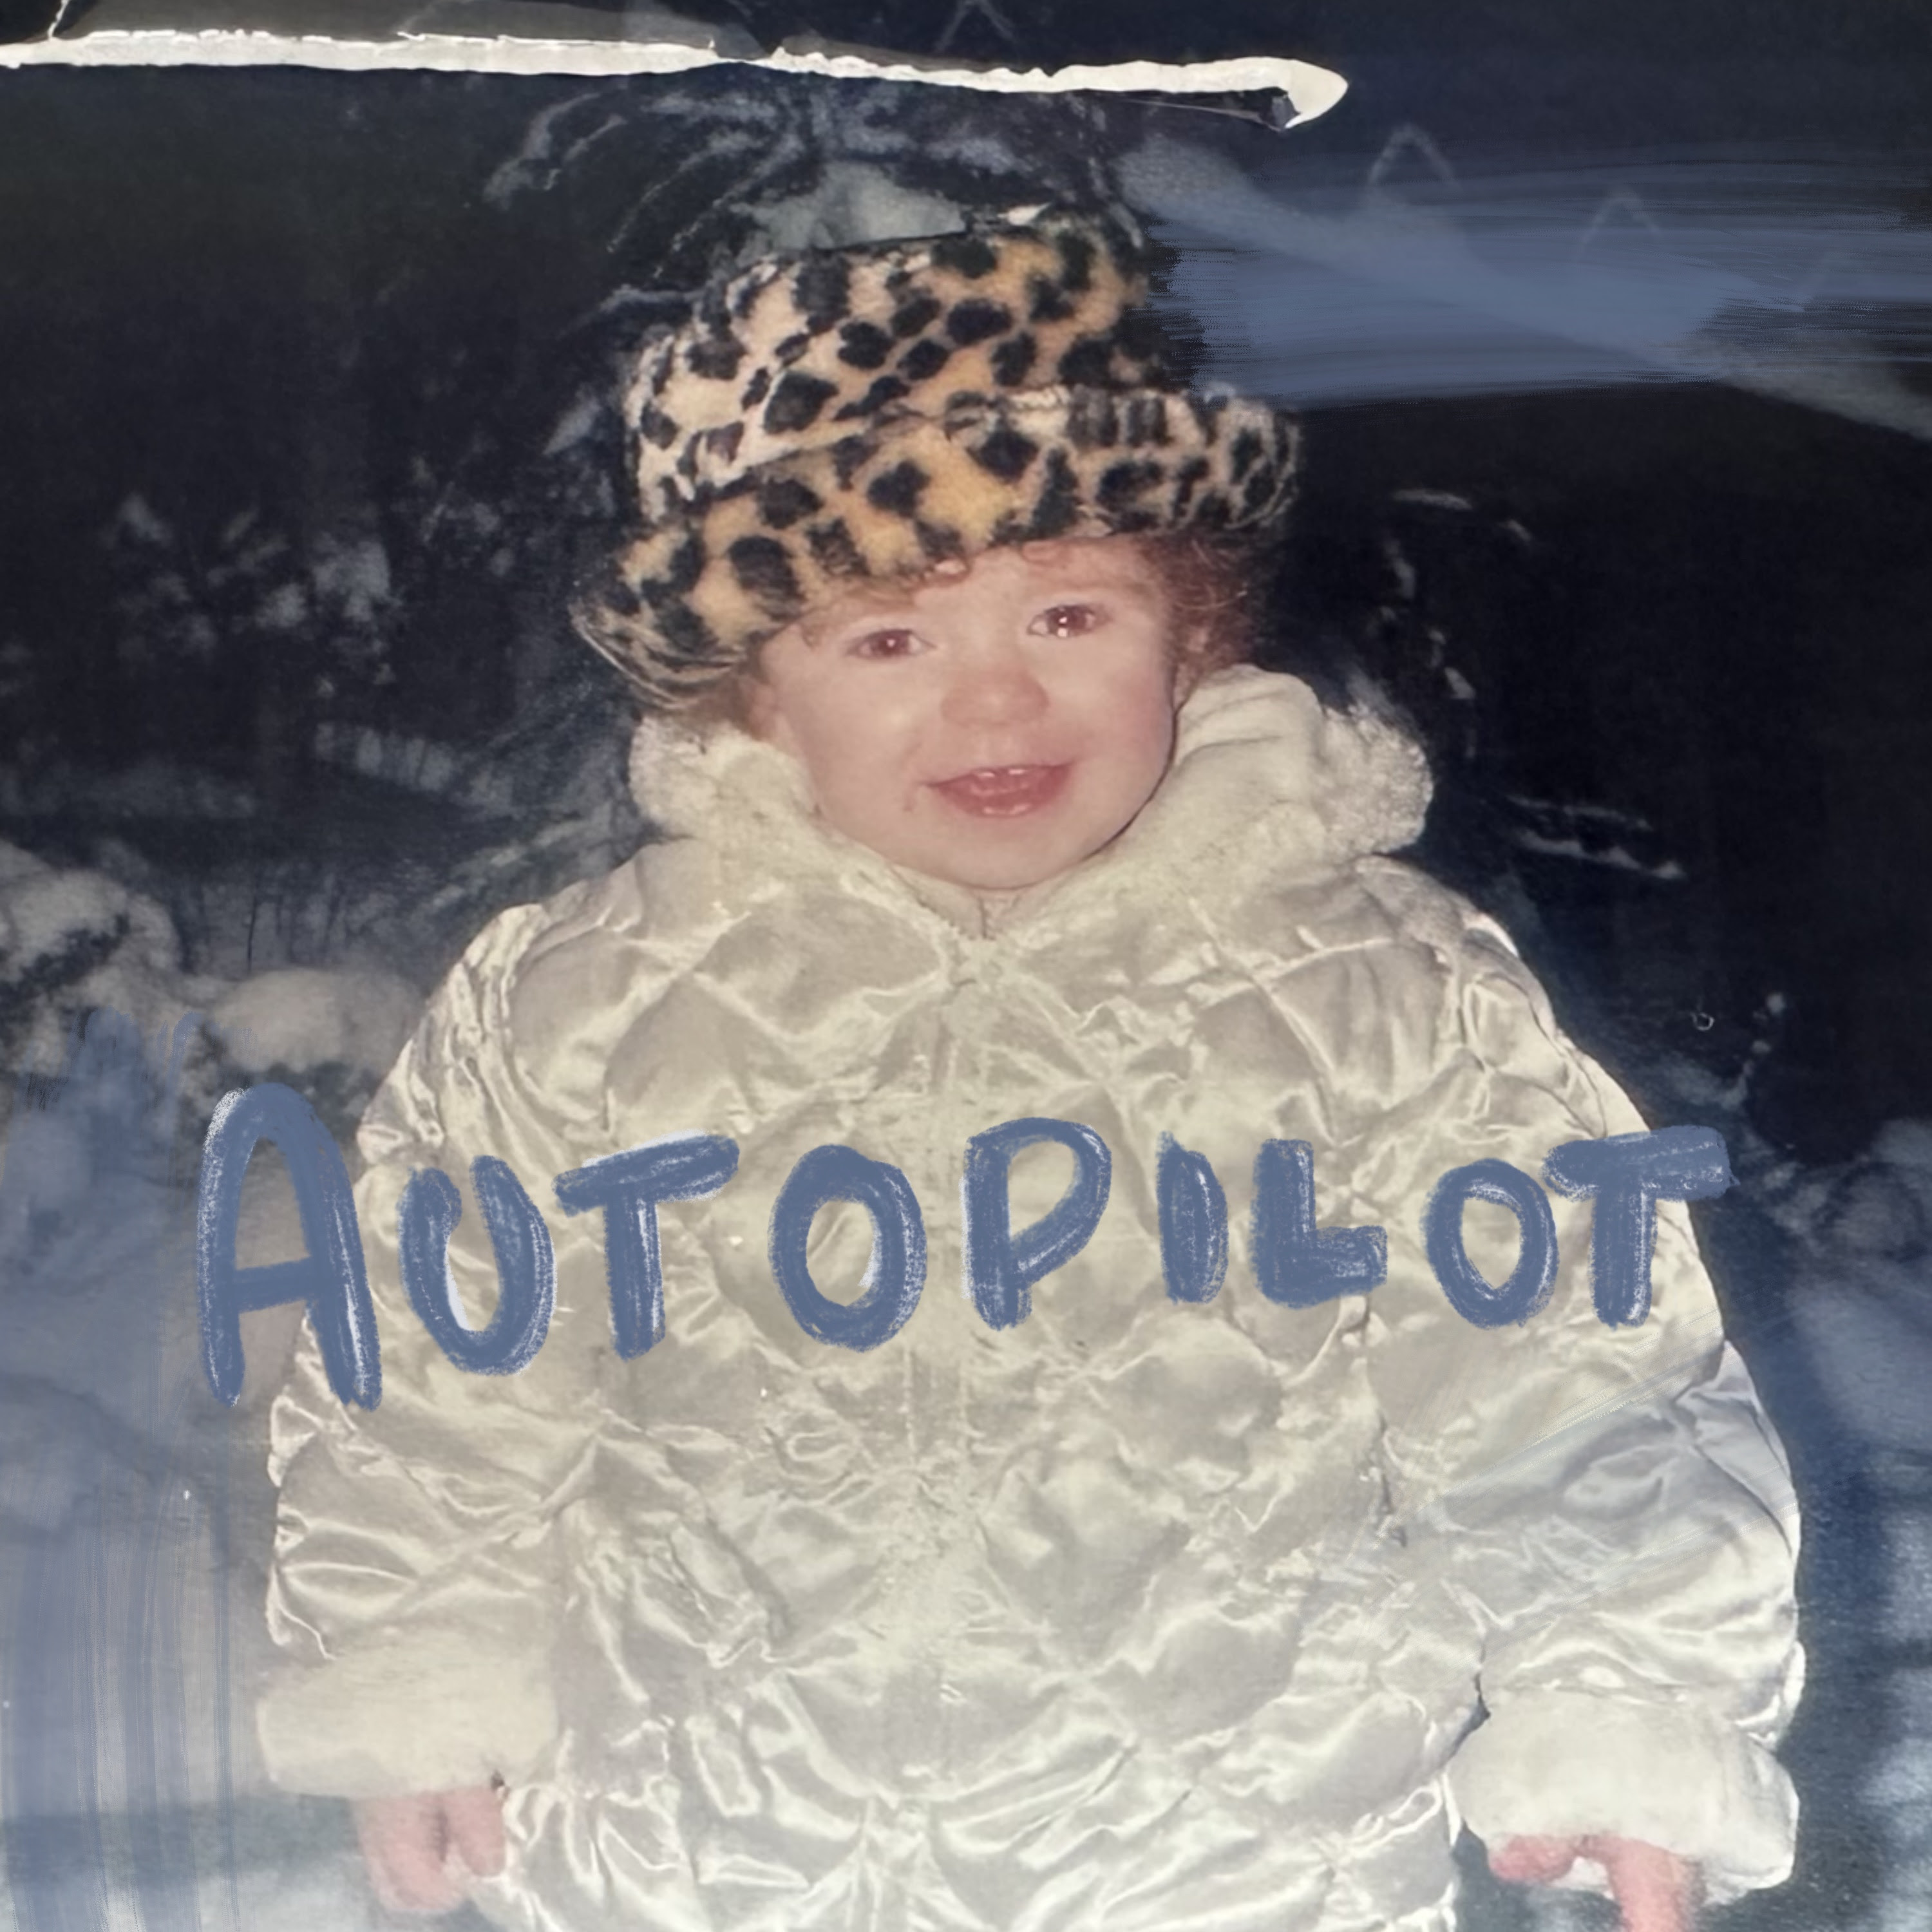 Toddler ROE in a big puffy white coat and leopard print hat with song title 'Autopilot' drawn in blue